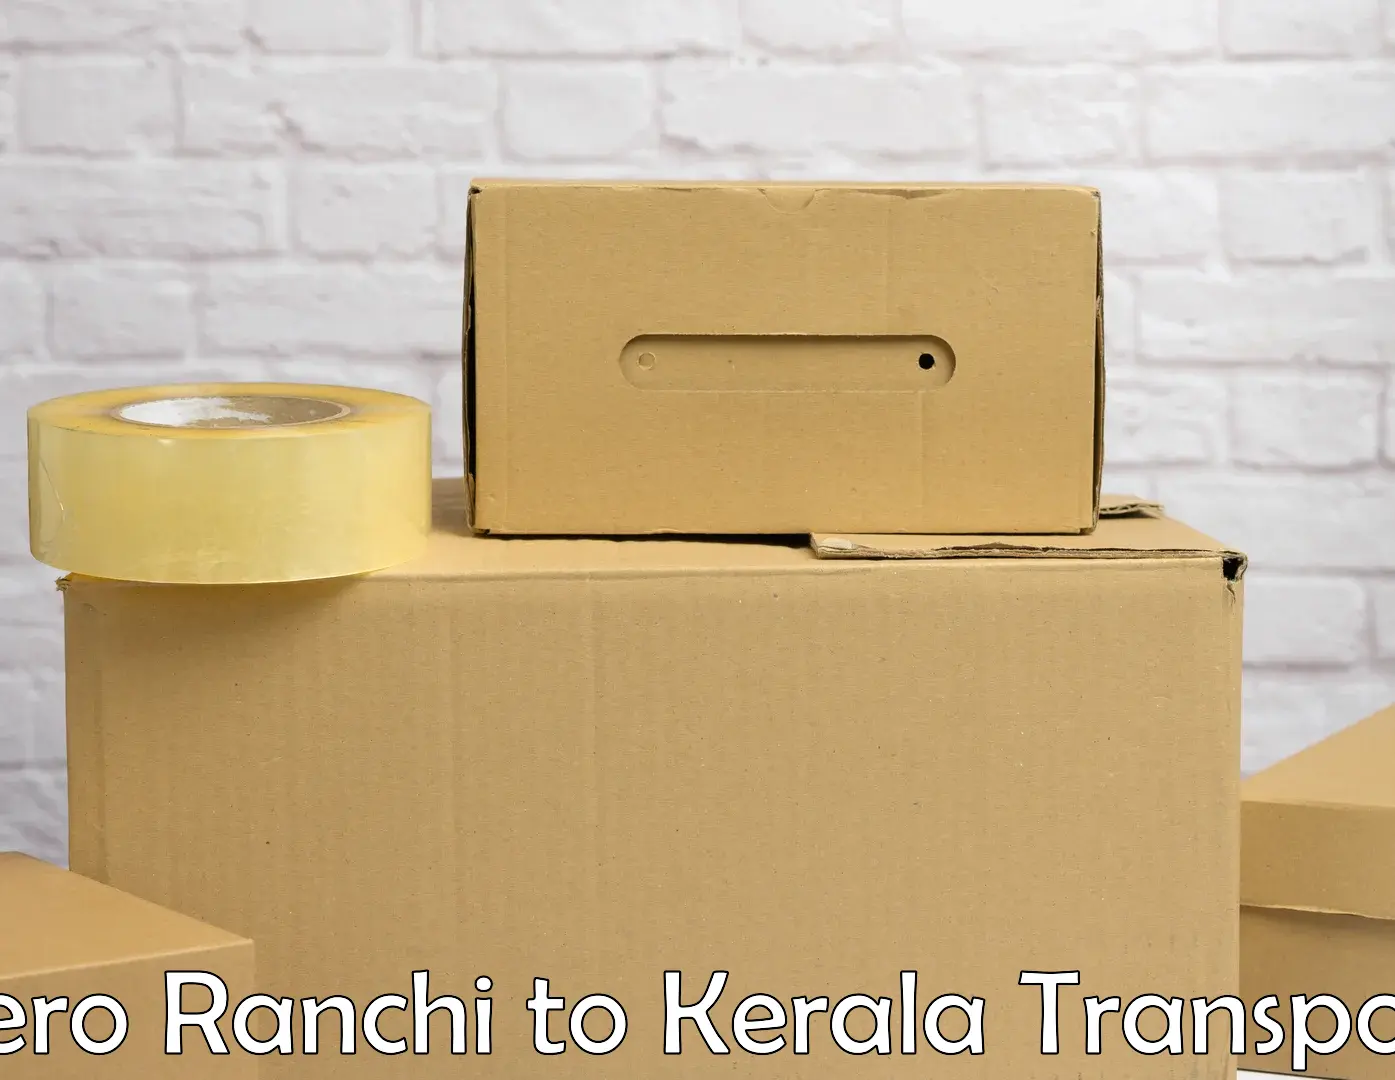 Best transport services in India Bero Ranchi to Koothattukulam